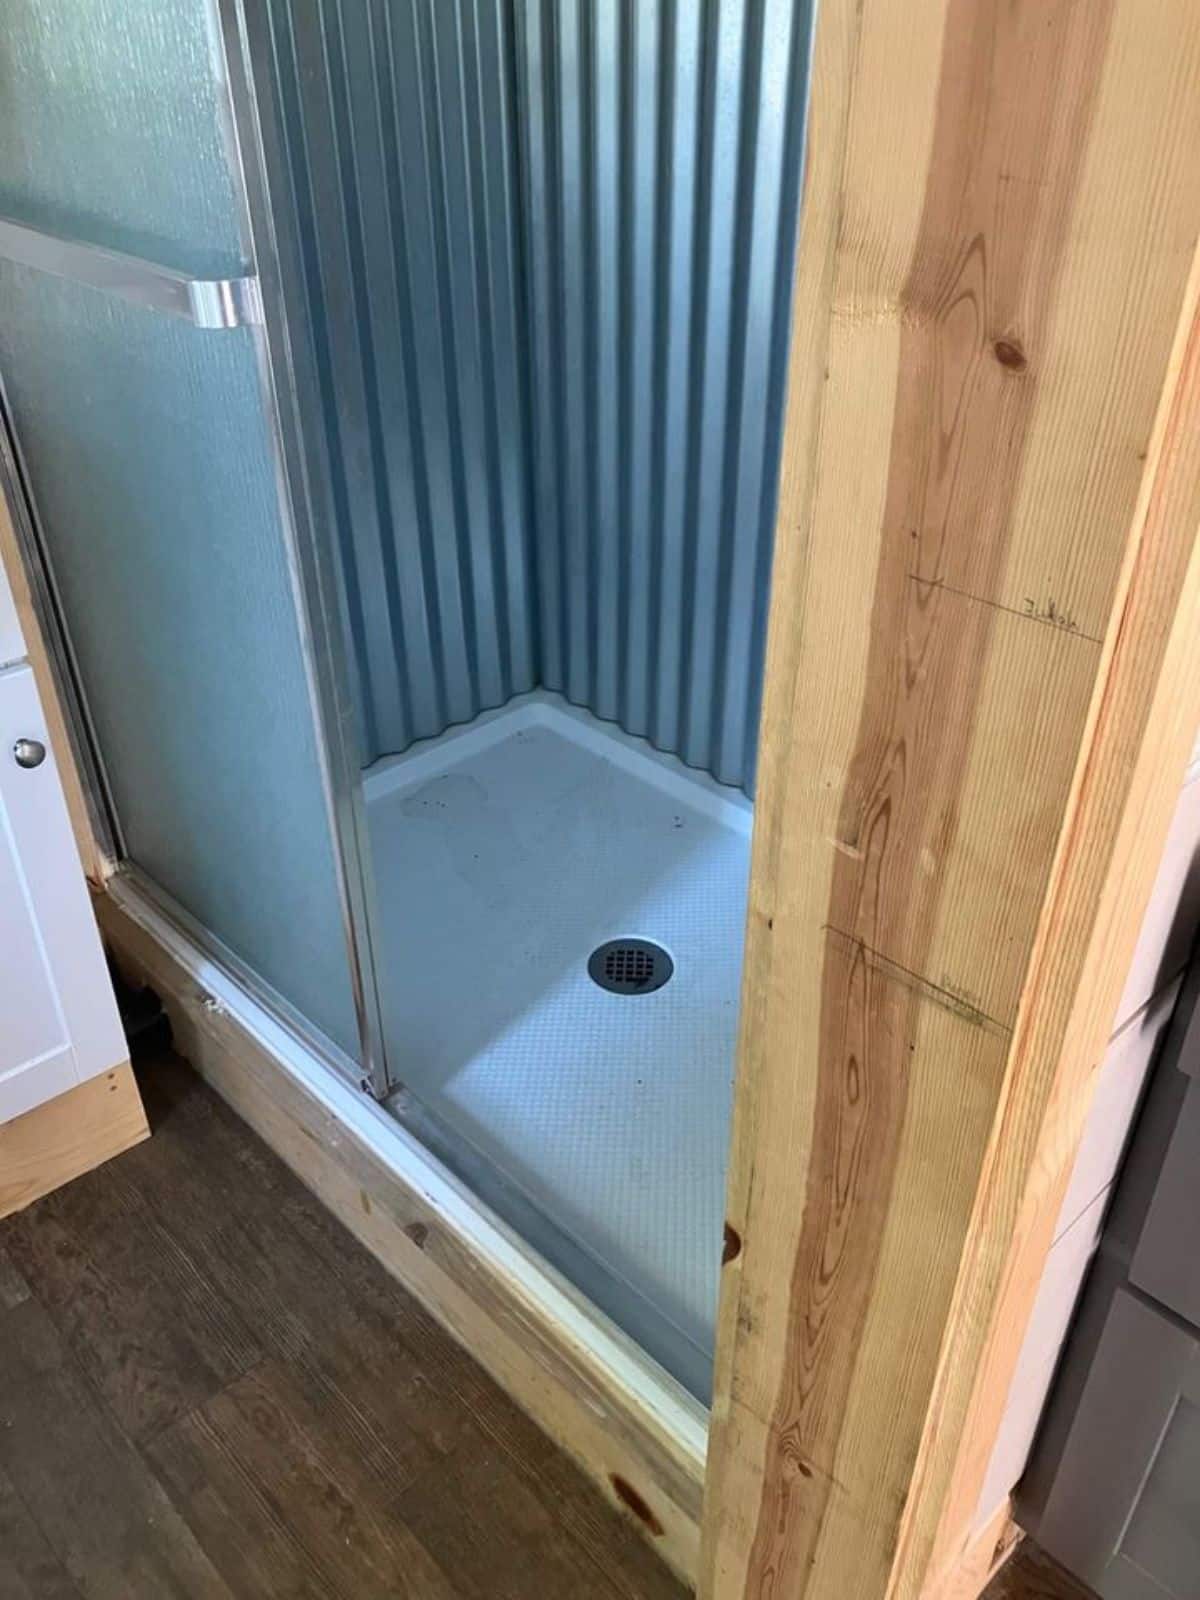 Bathroom of 30' Tiny House on Wheels has a separate shower area, toilte and small sink